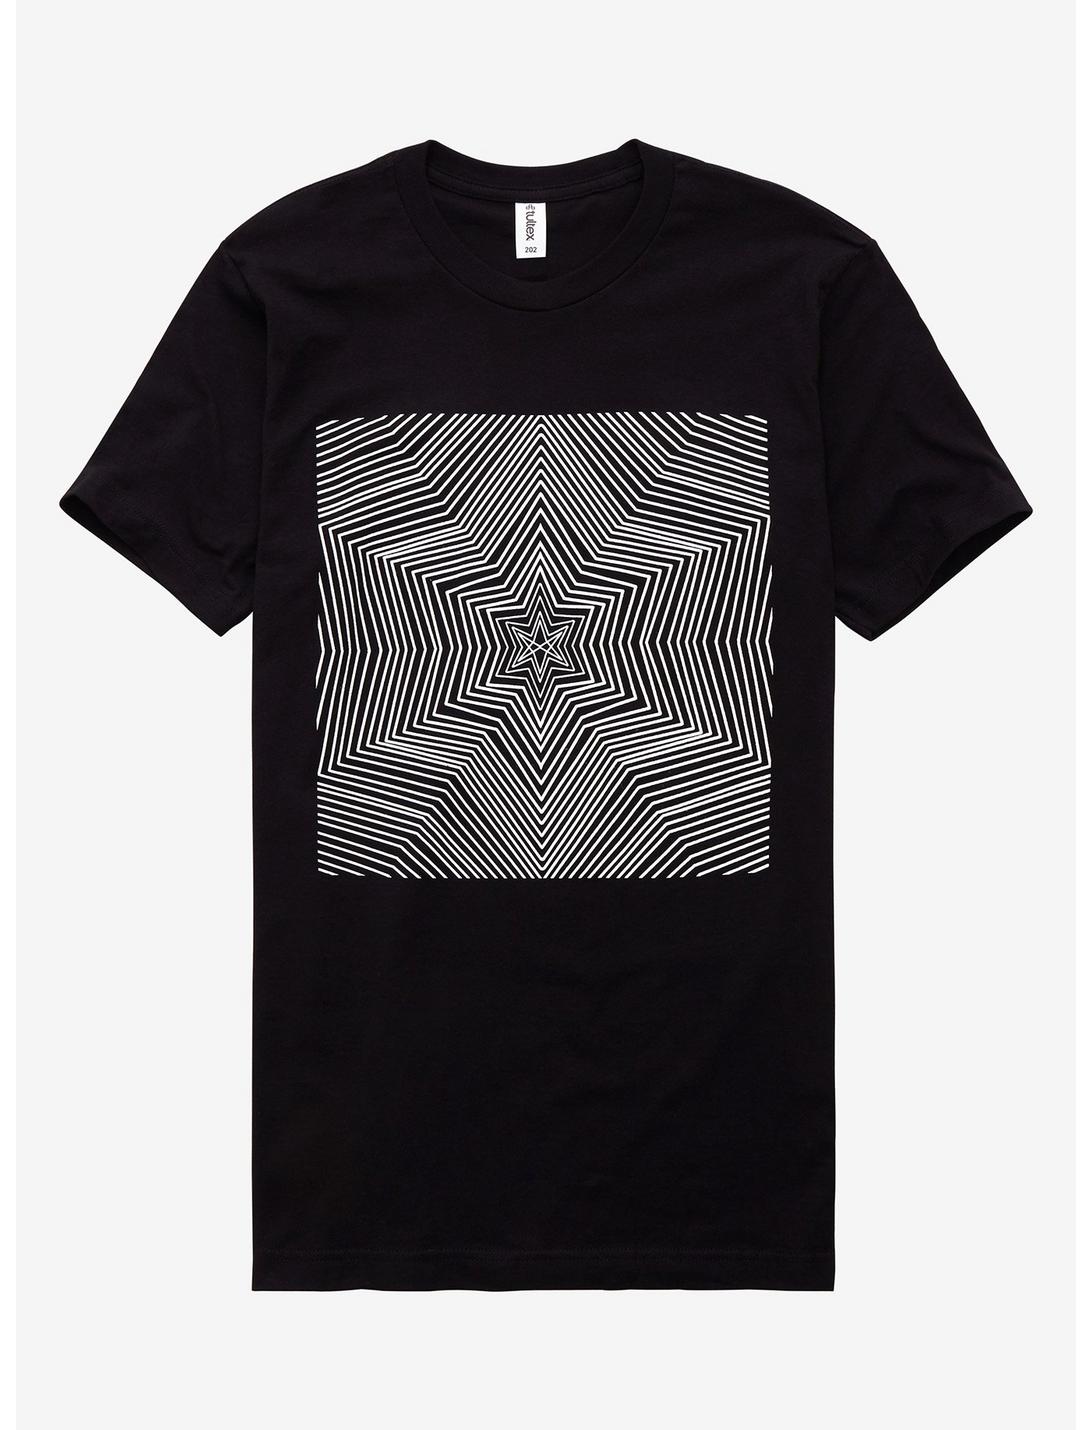 Bring Me The Horizon Obey T-Shirt | Hot Topic